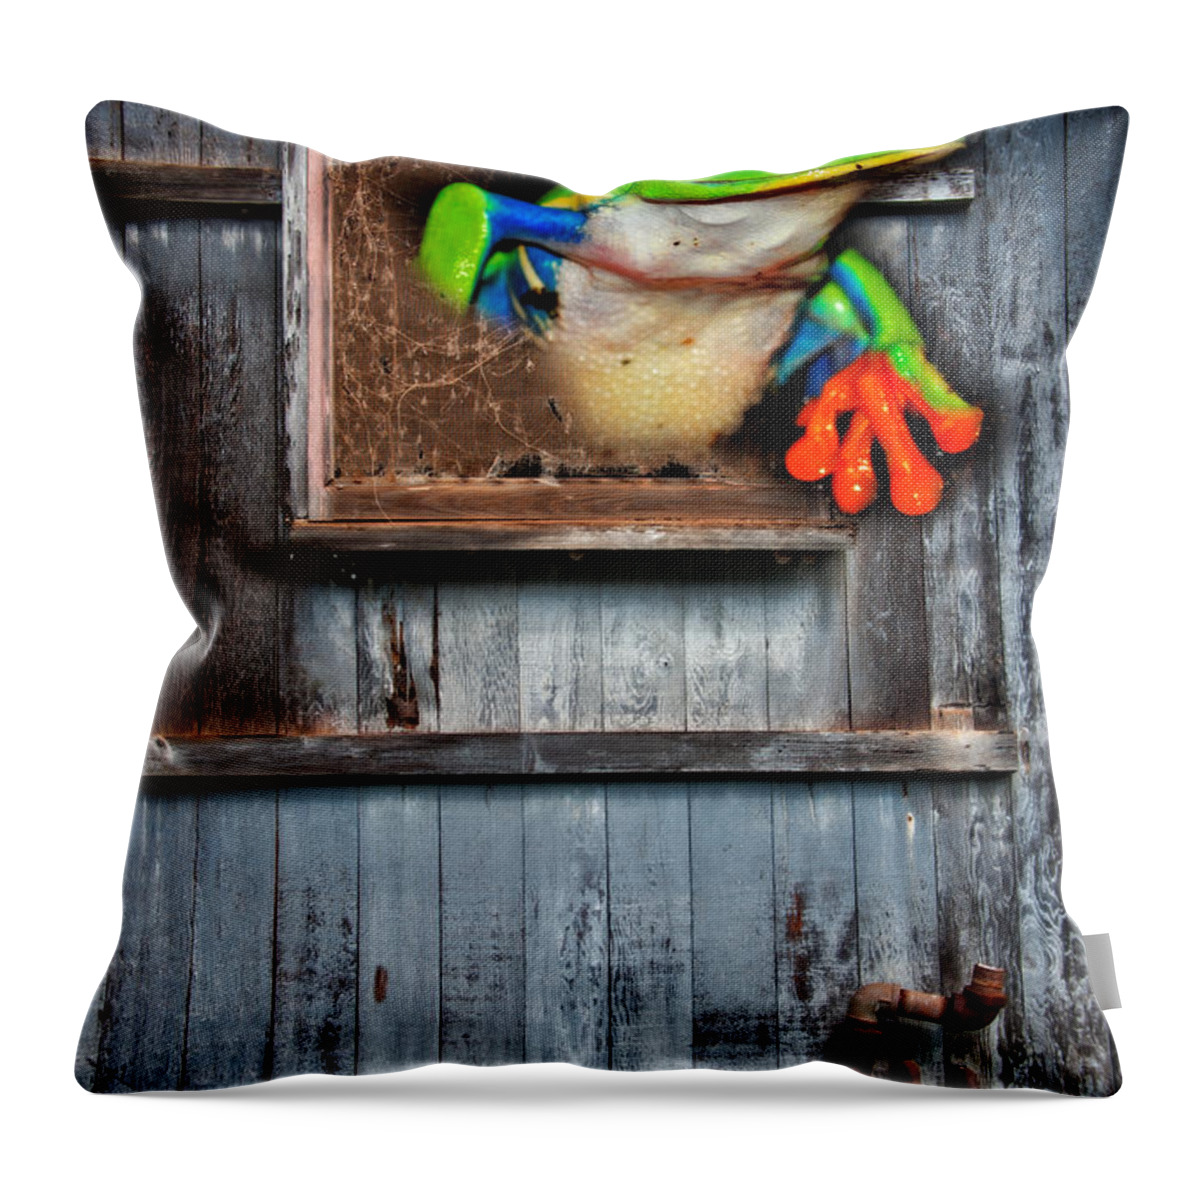 Frog Throw Pillow featuring the photograph Hello World by Harry Spitz